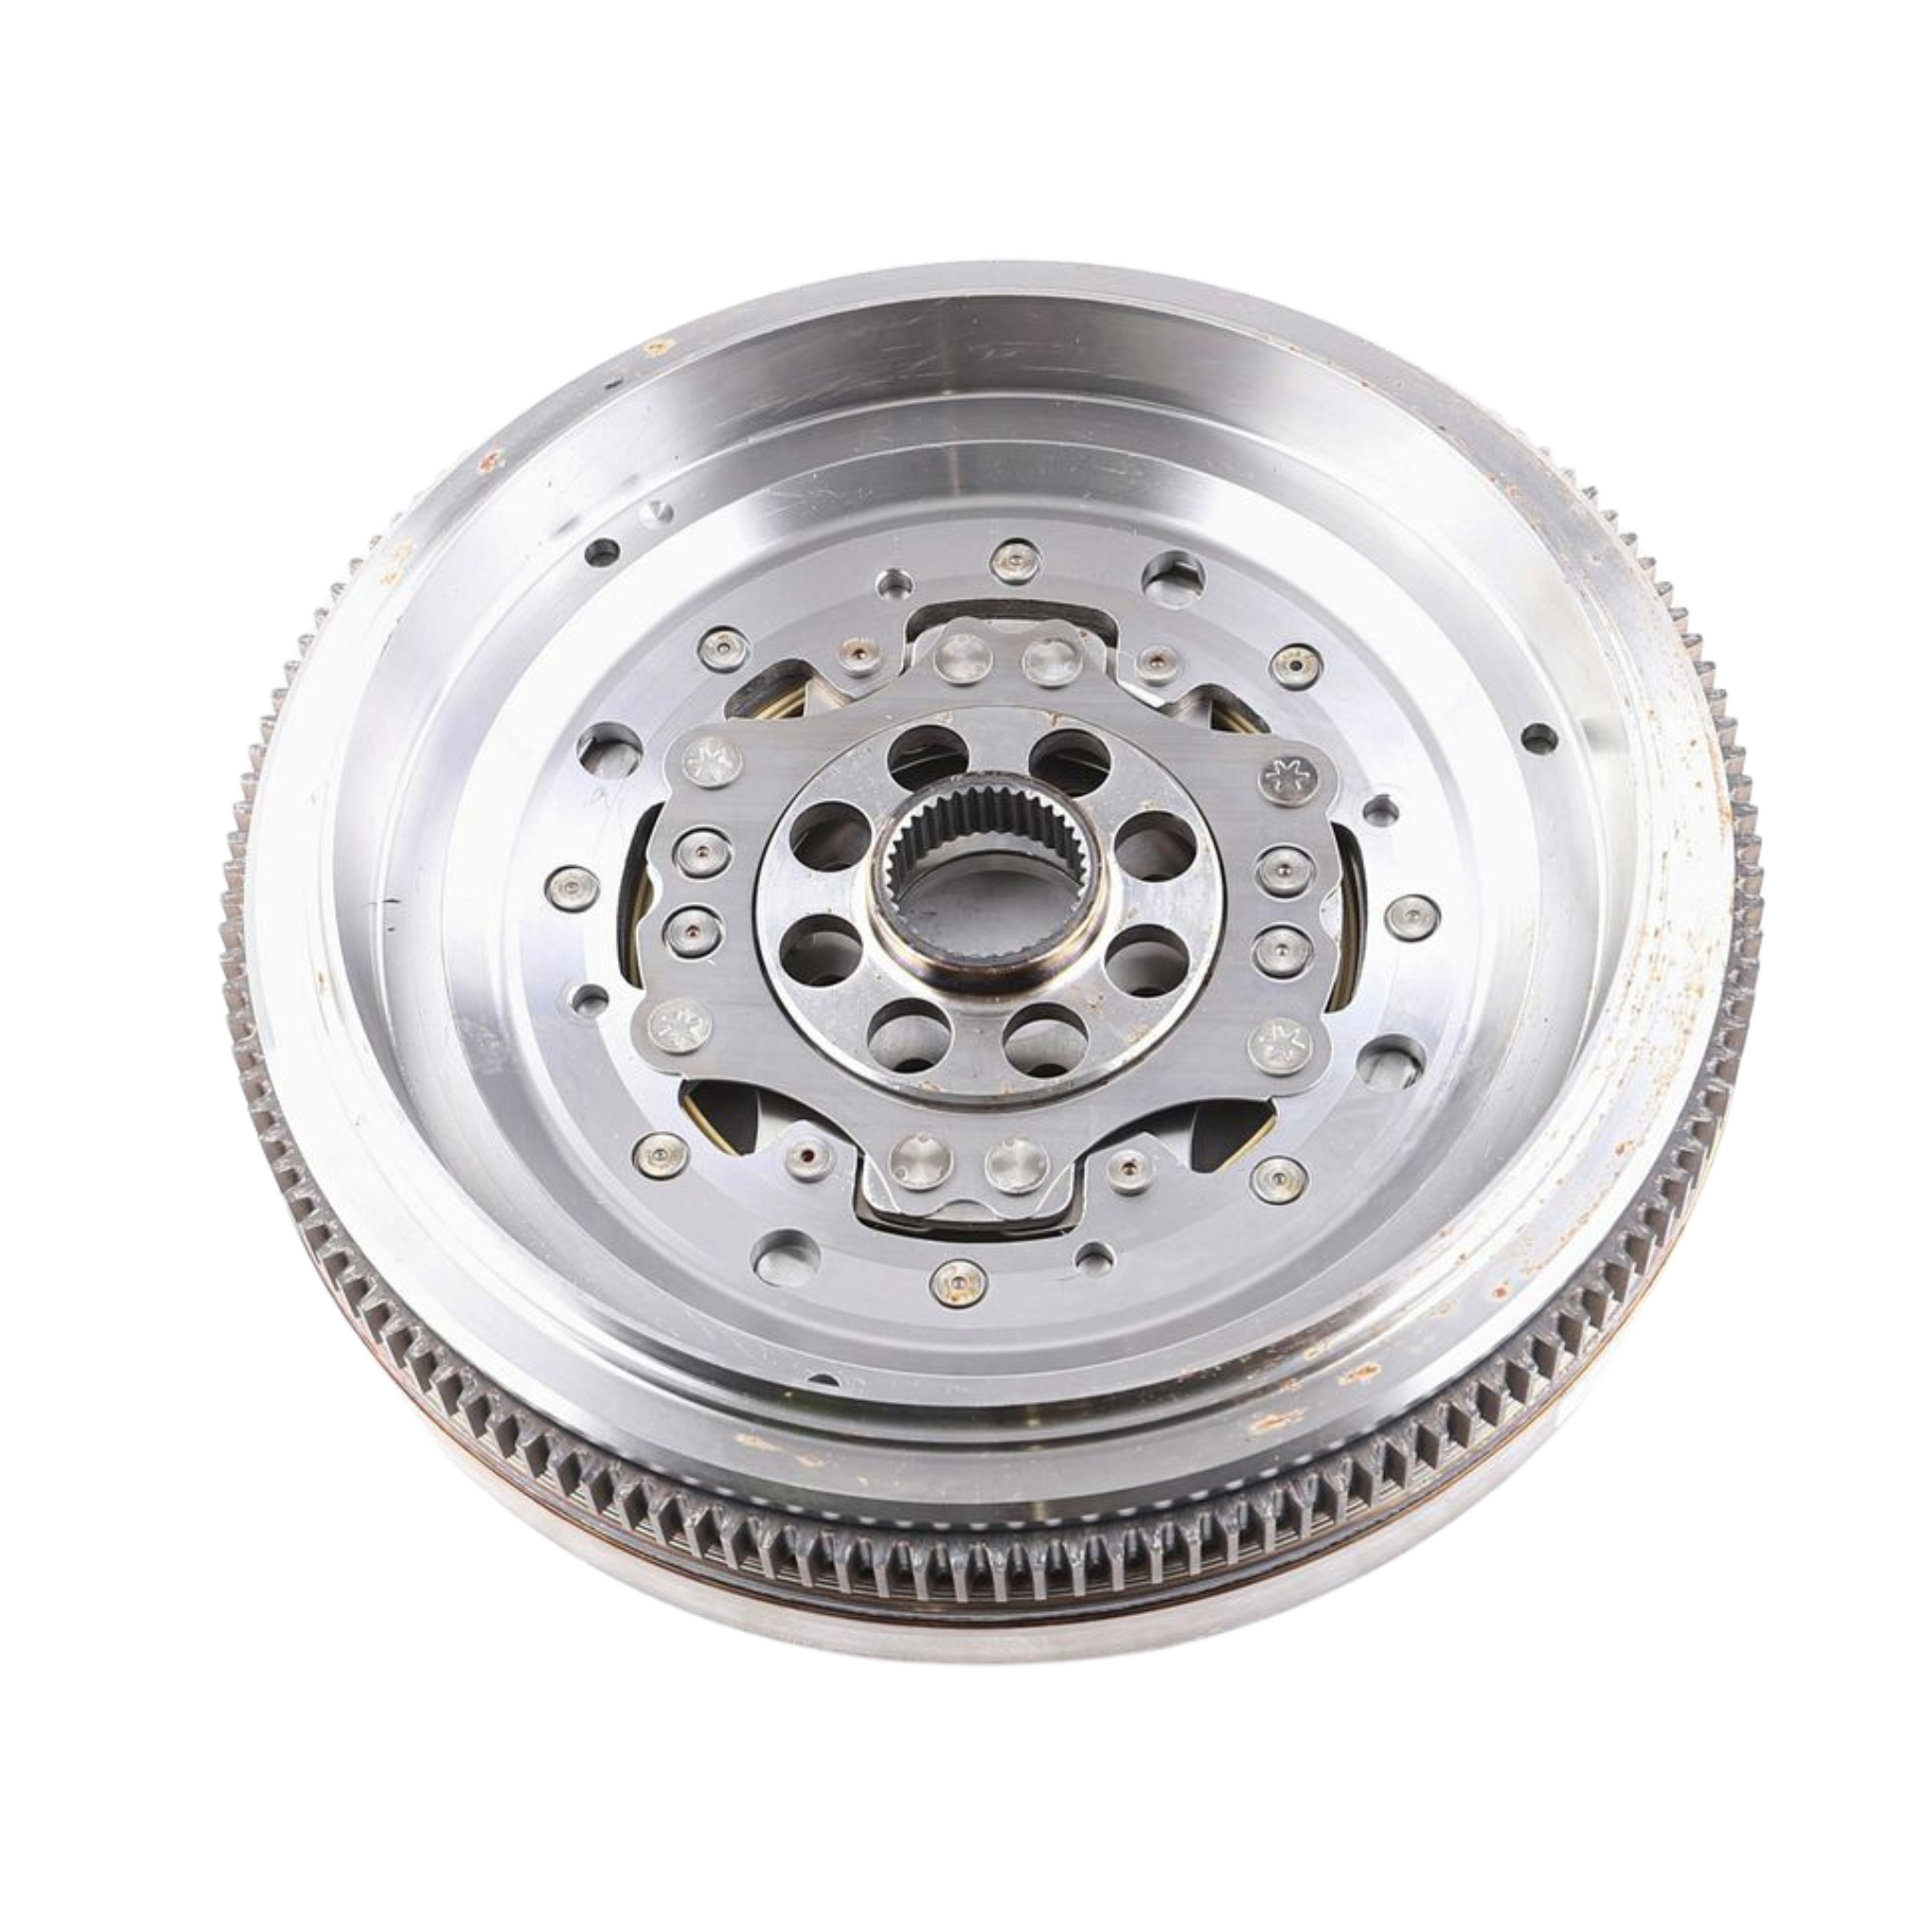 New Flywheel for DCT Auto Audi RS3 15-17 FVW222DM